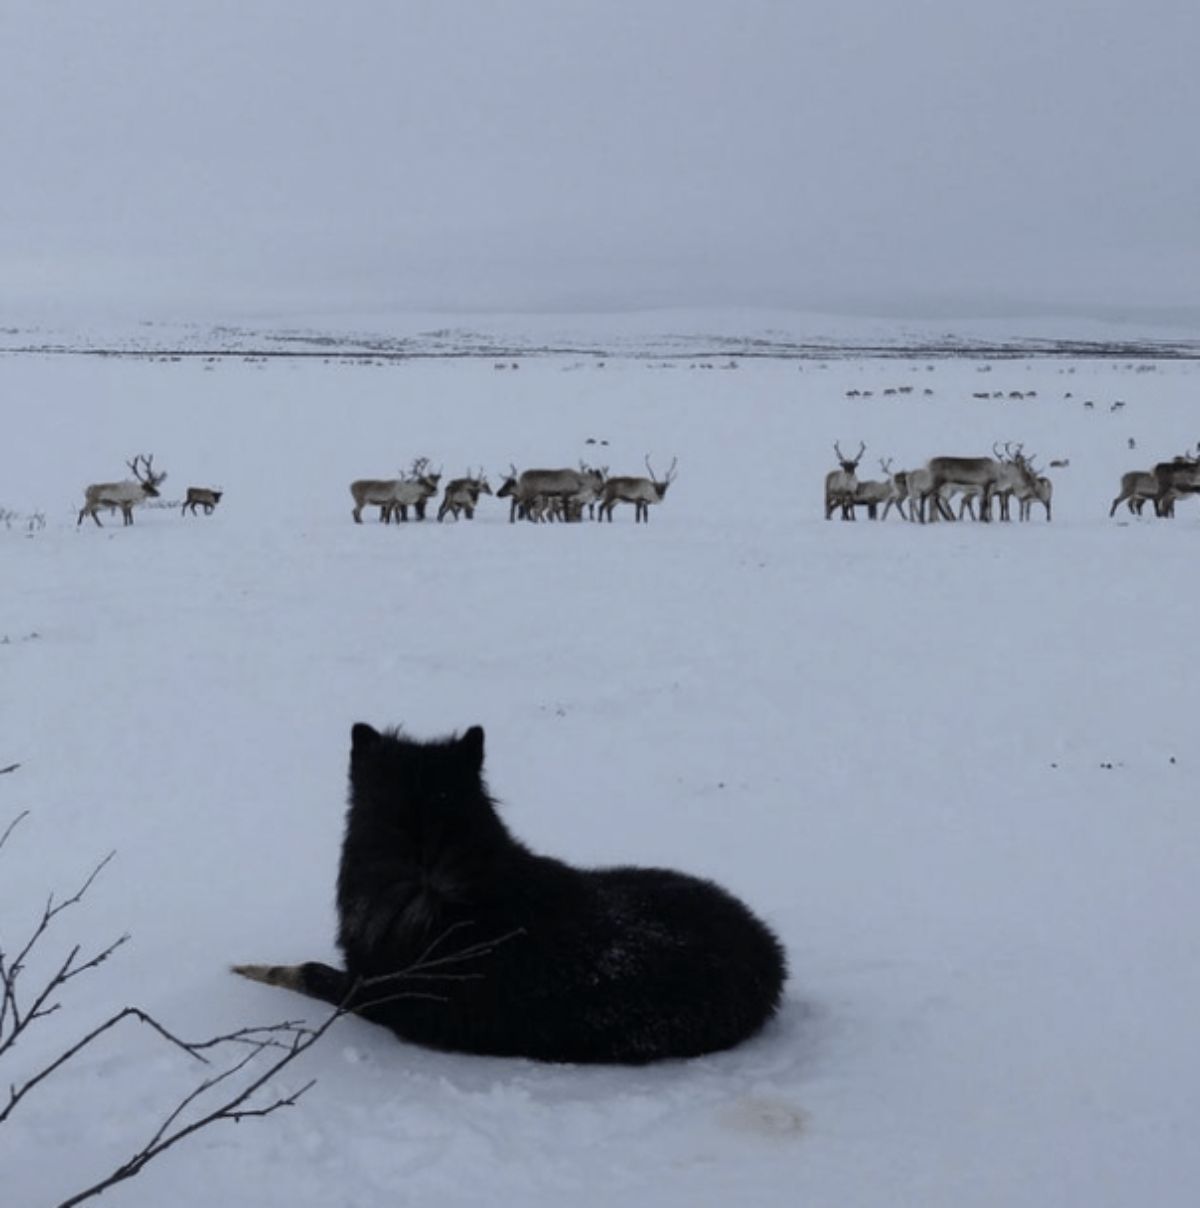 fluffy black dog laying on snow with reindeer in the distance